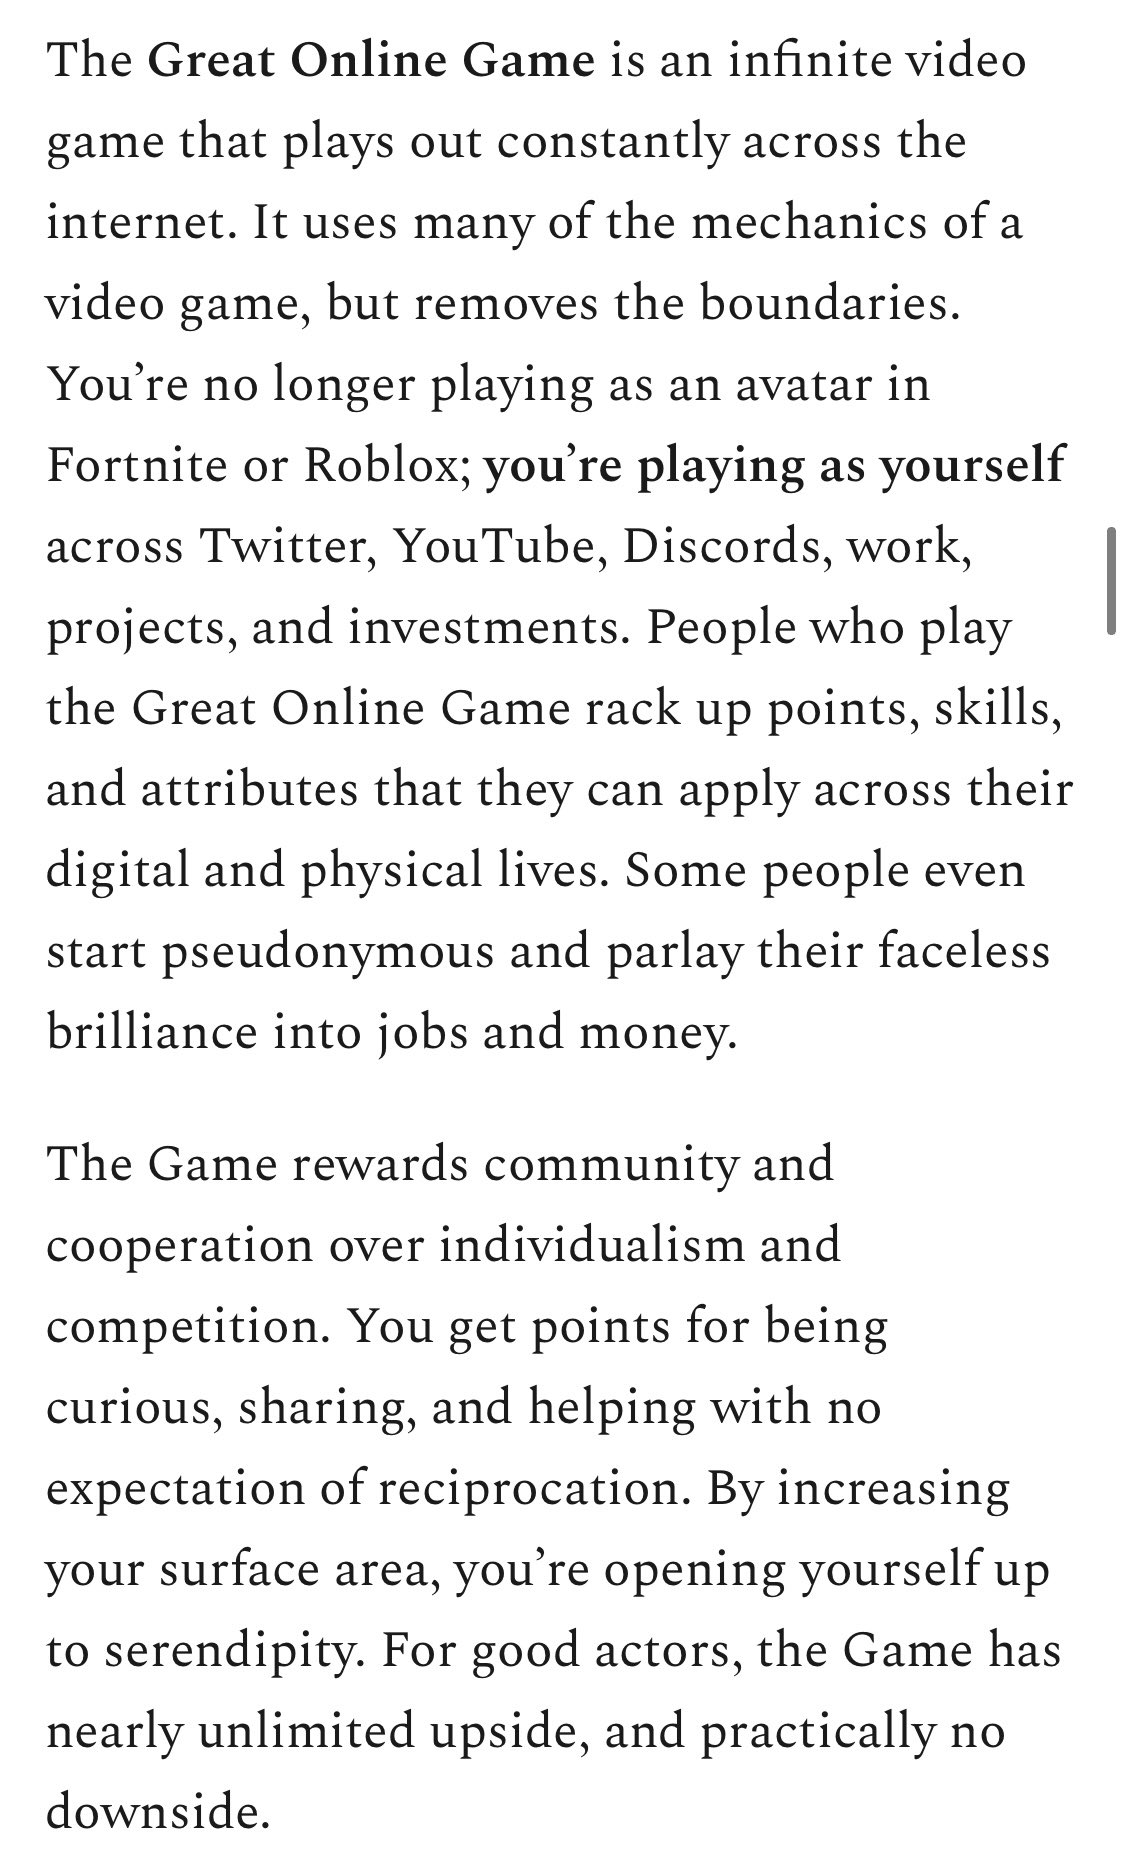 cdixon.eth on X: “The Great Online Game is an infinite video game that  plays out constantly across the internet. It uses many of the mechanics of  a video game, but removes the